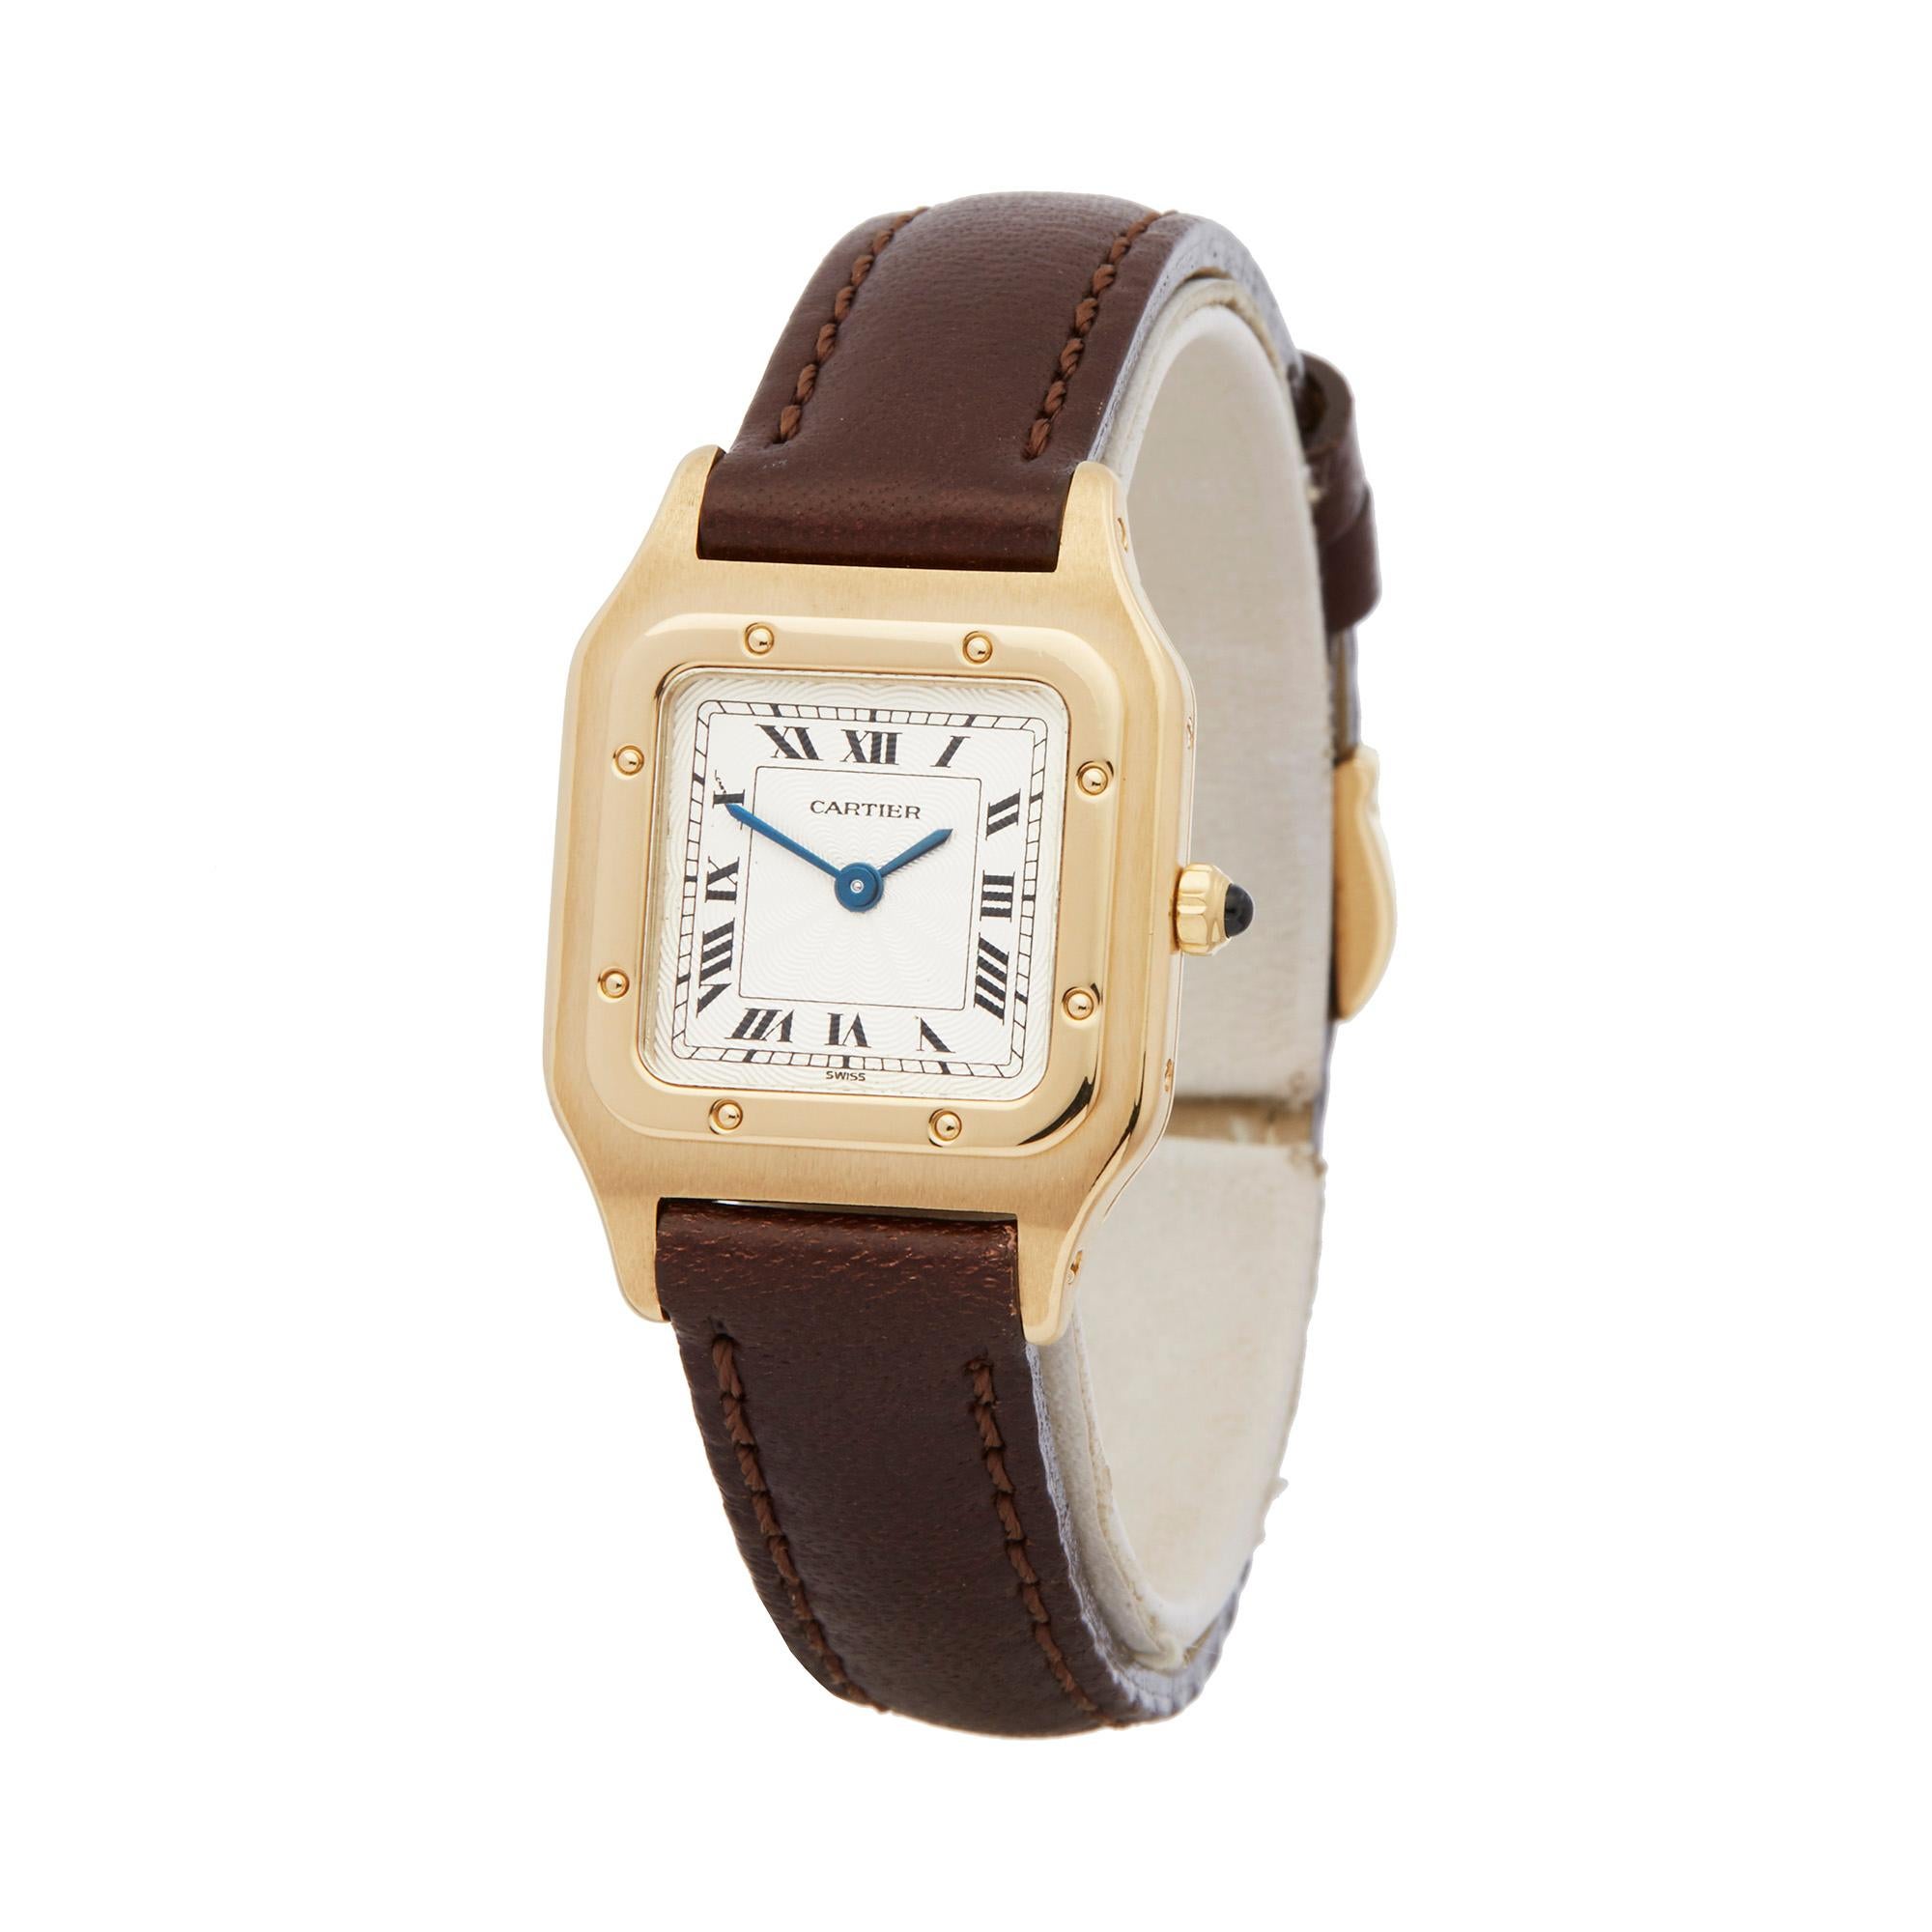 Reference: COM1993
Manufacturer: Cartier
Model: Santos Dumont
Model Reference: 1576
Age: Circa 1990's
Gender: Women's
Box and Papers: Presentation Box
Dial: White Roman
Glass: Sapphire Crystal
Movement: Quartz
Water Resistance: To Manufacturers